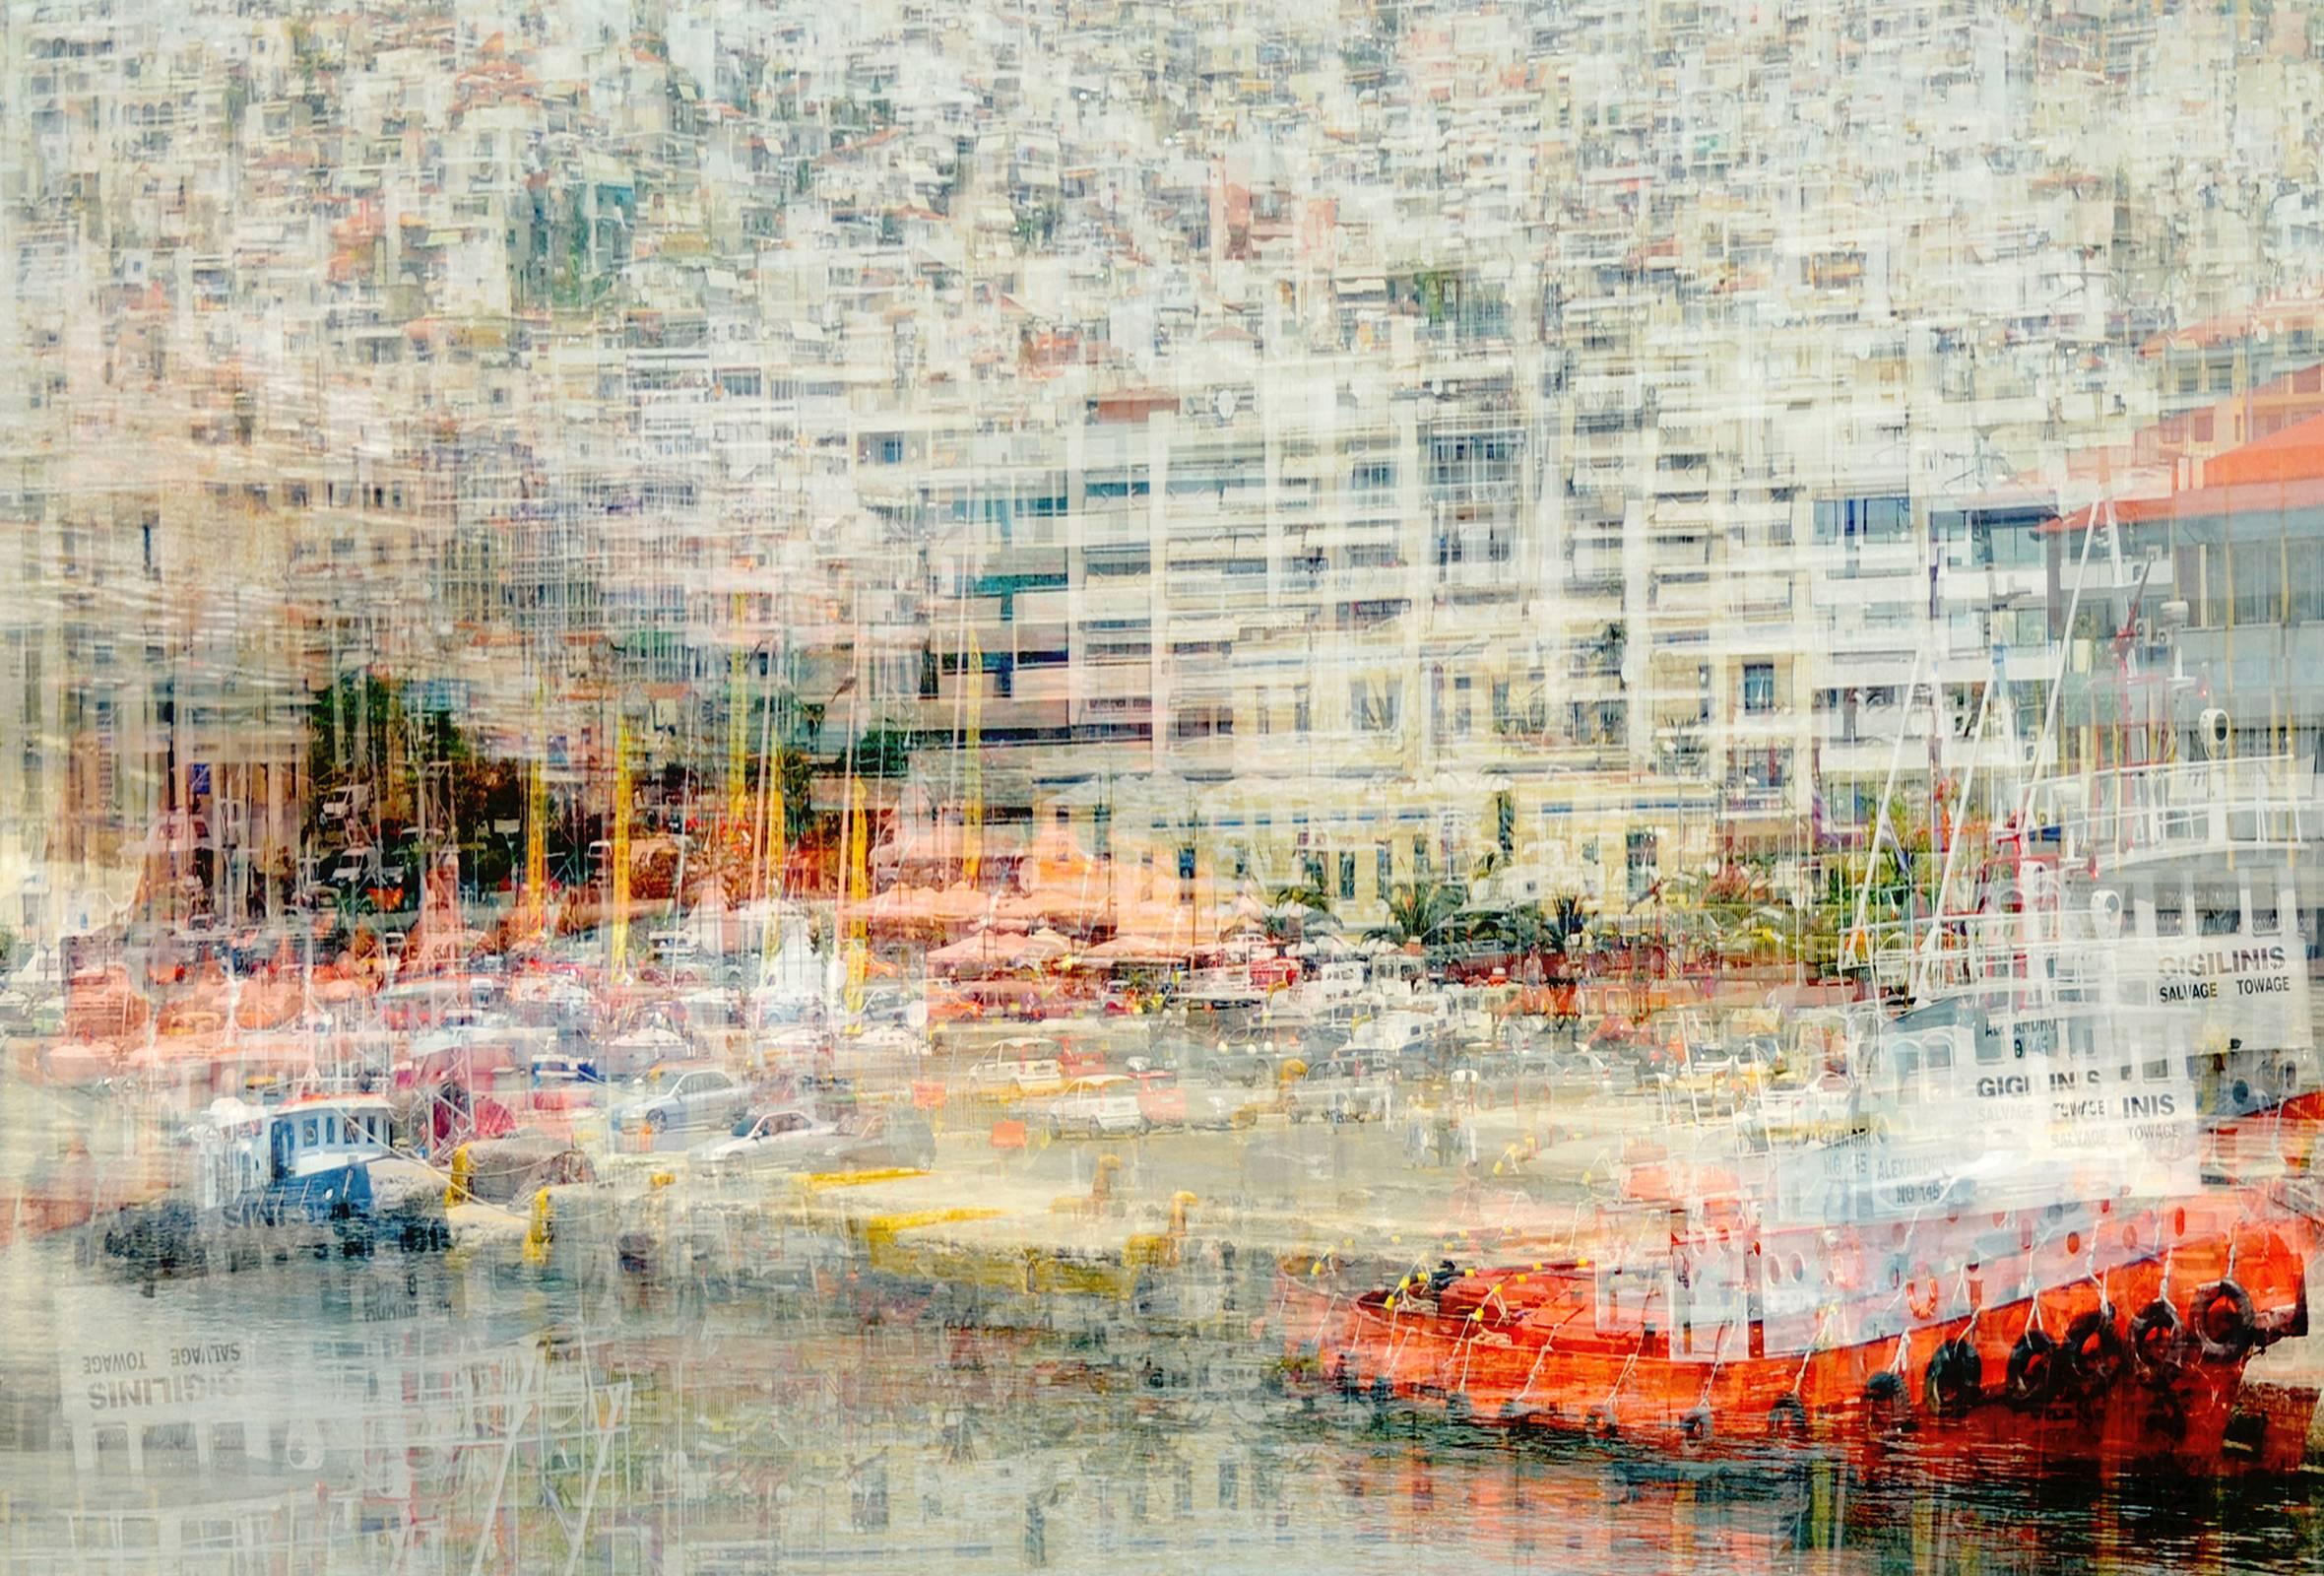 Stephanie Jung Abstract Photograph - Kavala View- semi abstract contemporary urban cityscape photograph